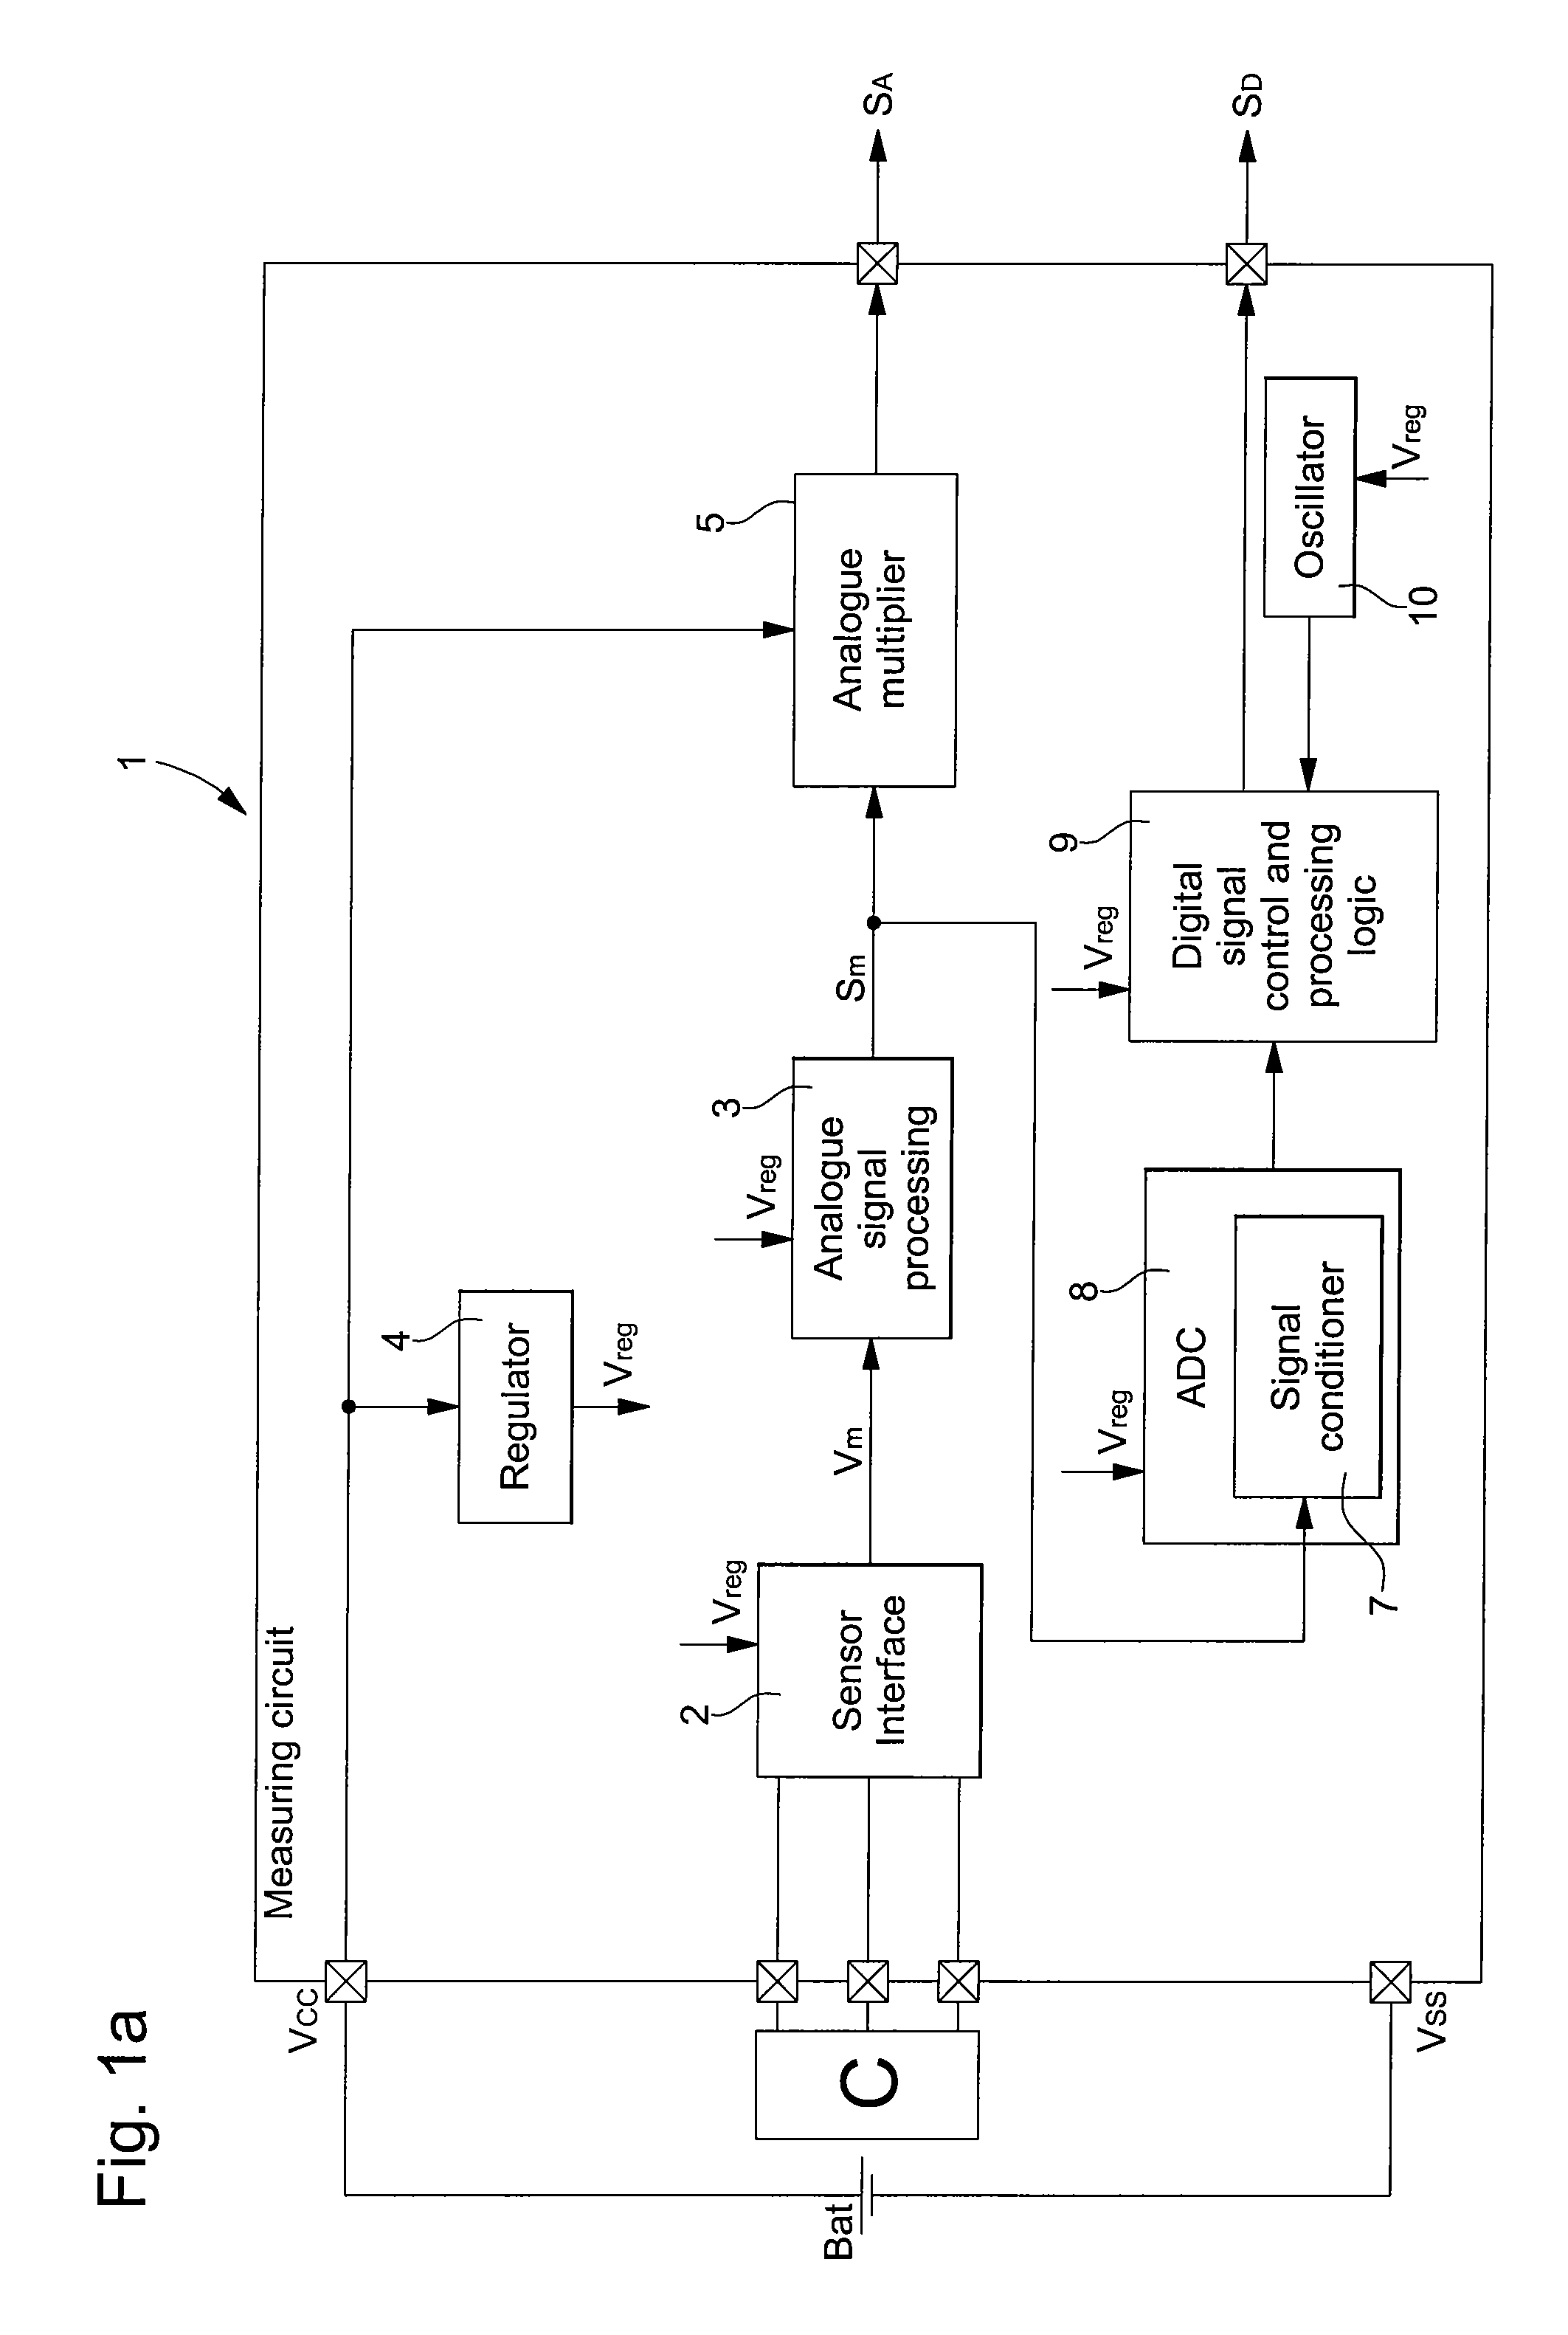 Electronic circuit for measuring a physical parameter supplying an analogue measurement signal dependent upon the supply voltage